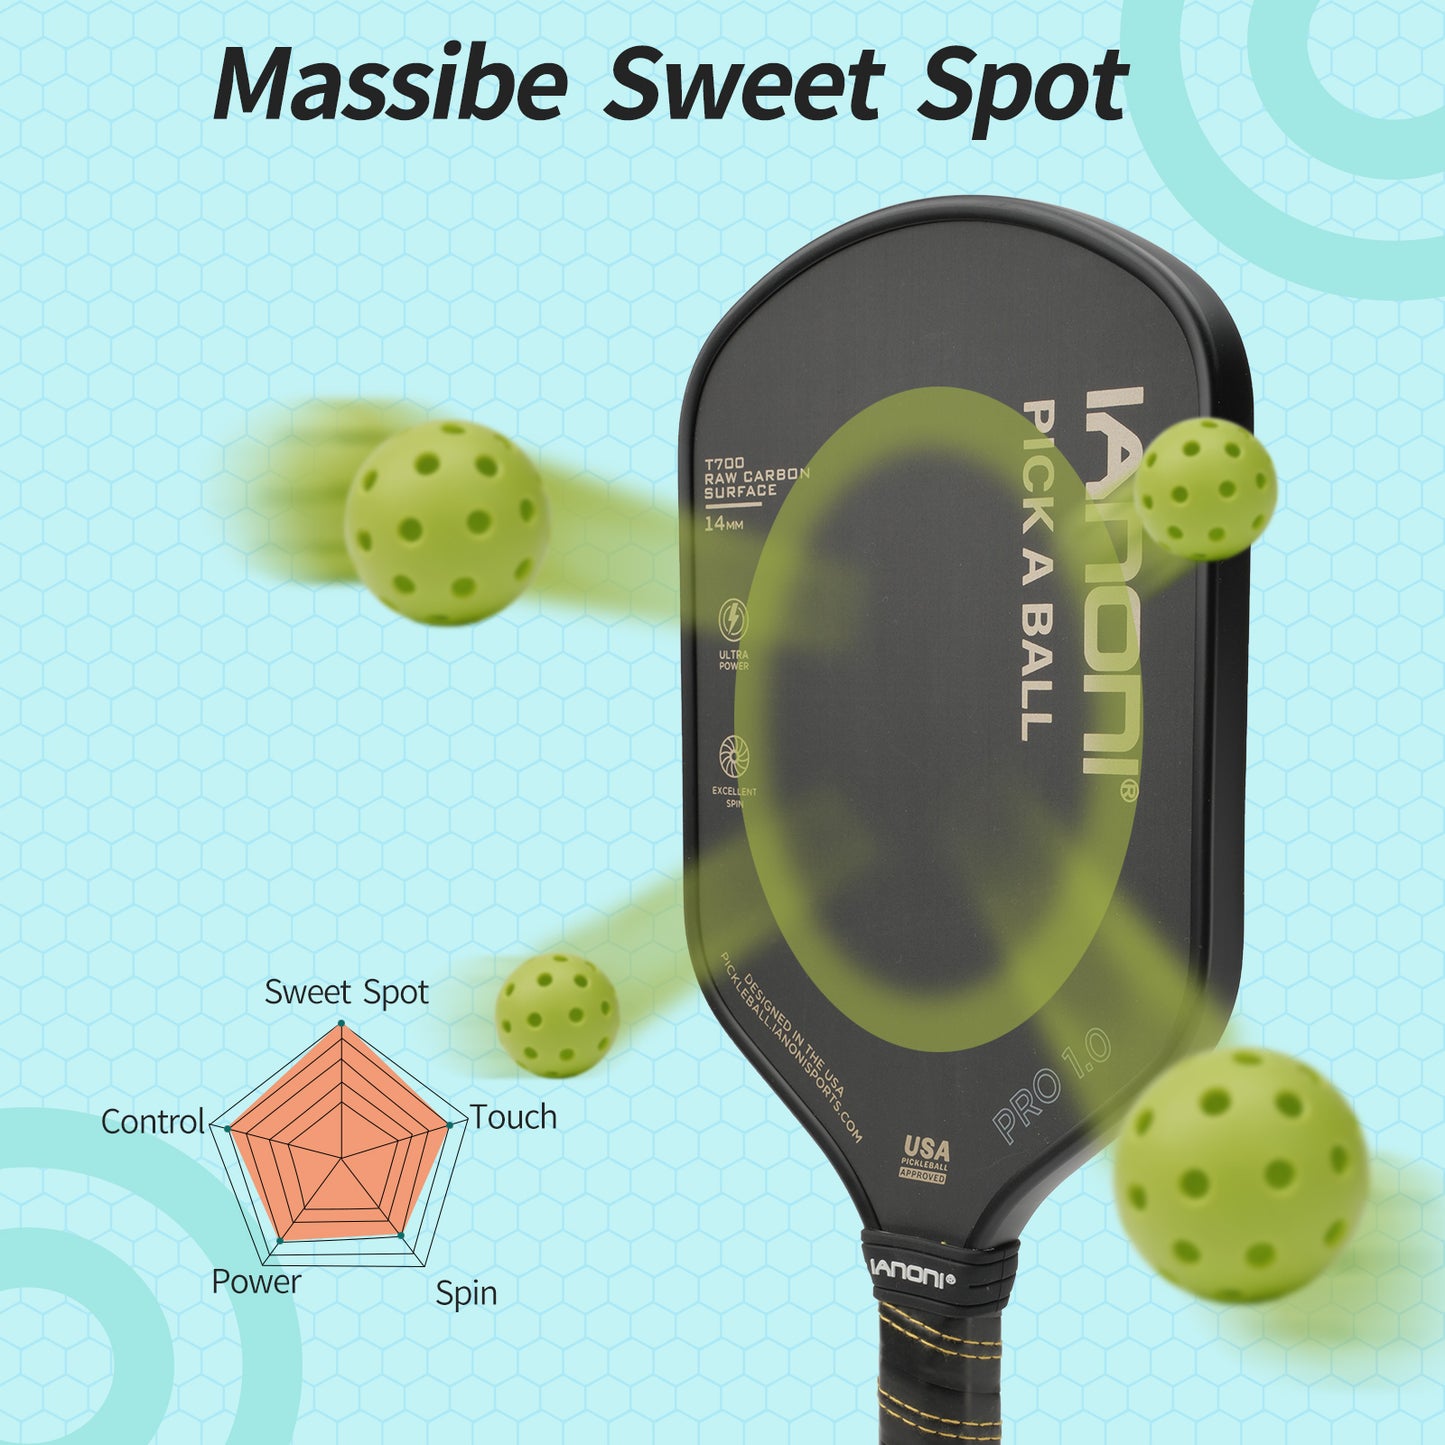 IANONI Pickleball Paddle - T700 Carbon Friction Textured Surface with High Grit & Spin and Agility, Pickleball Rackets with Highly Flexible and Fast Shot - IANONI PRO 1.0